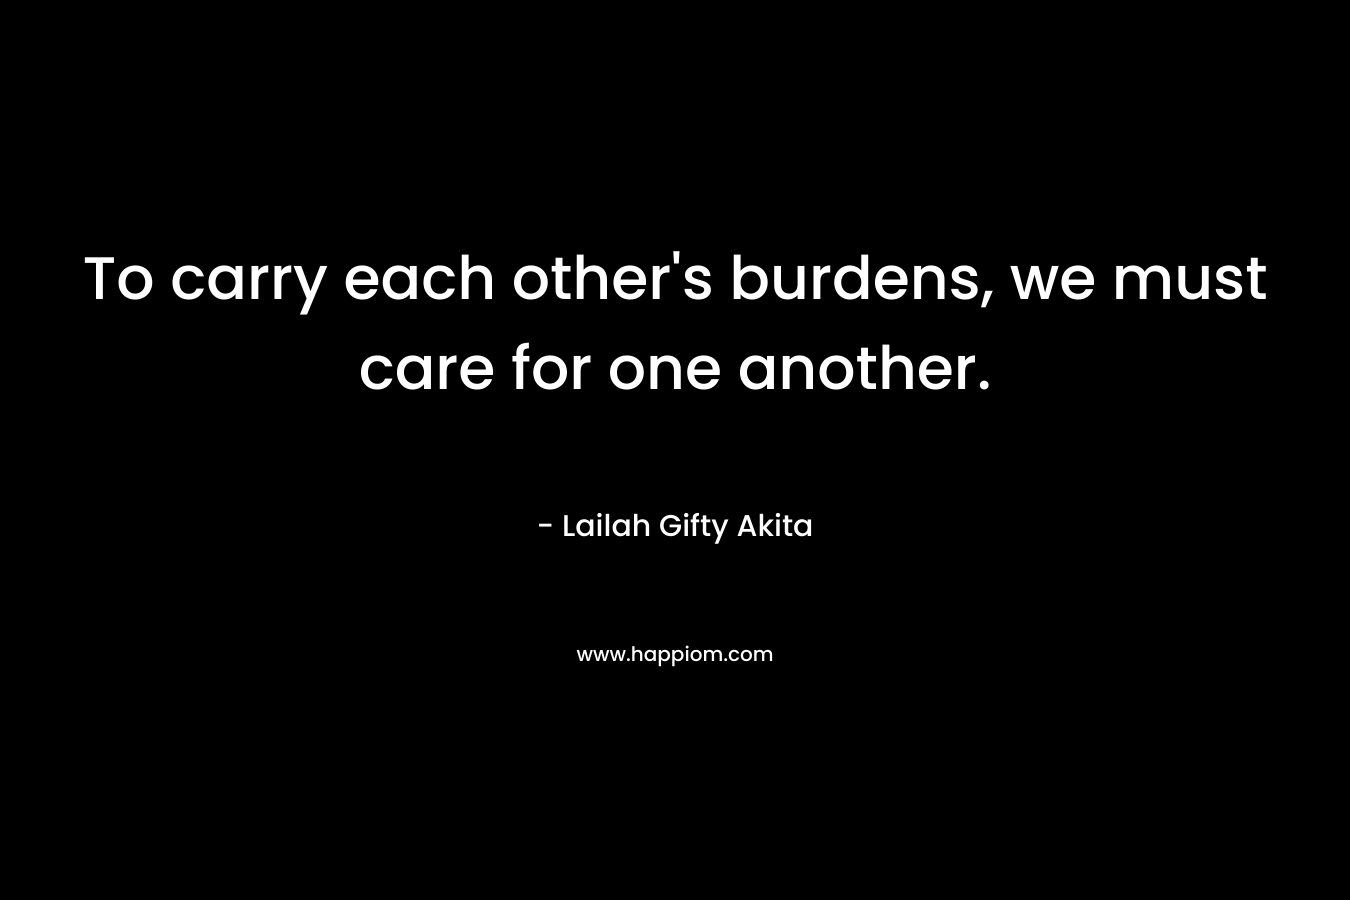 To carry each other's burdens, we must care for one another.